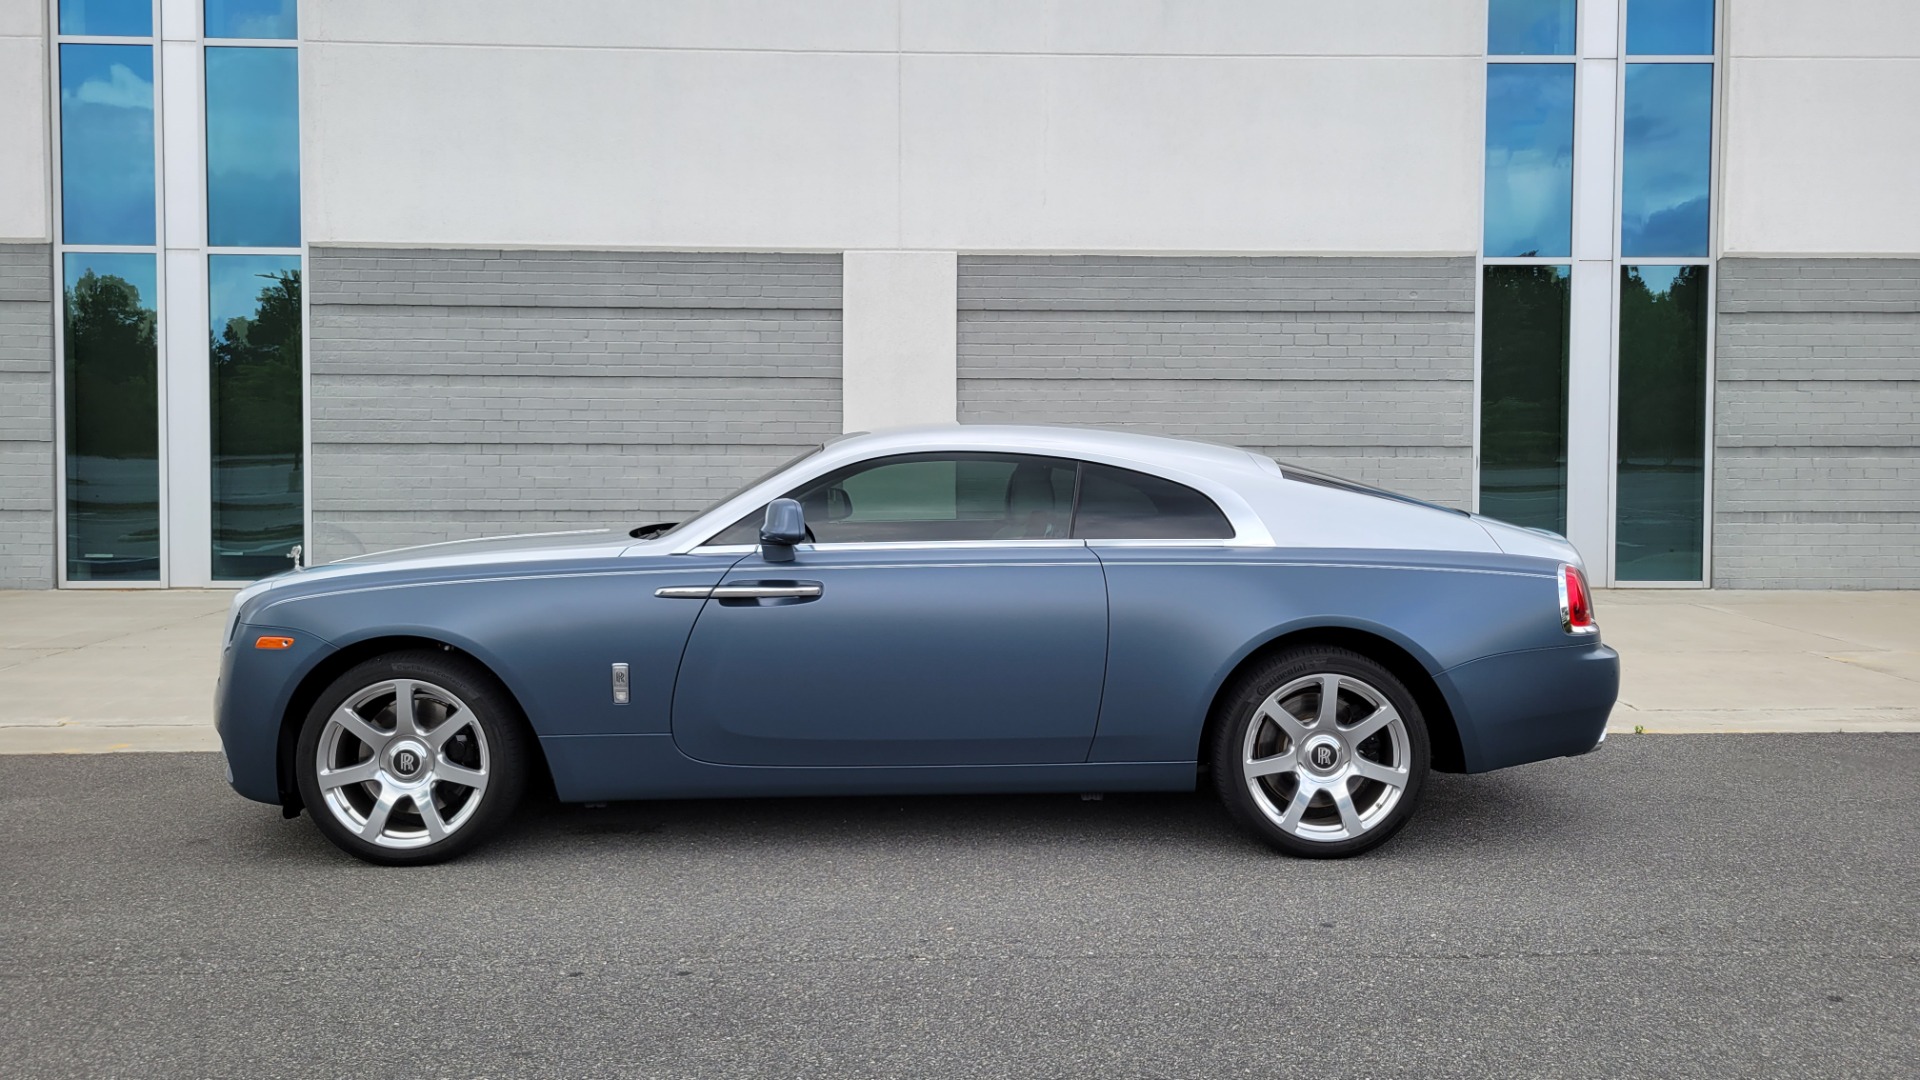 Used 2016 Rolls-Royce WRAITH COUPE / 6.6L V12 624HP / 8-SPD AUTO / NAV / STARLIGHT / REARVIEW for sale Sold at Formula Imports in Charlotte NC 28227 9